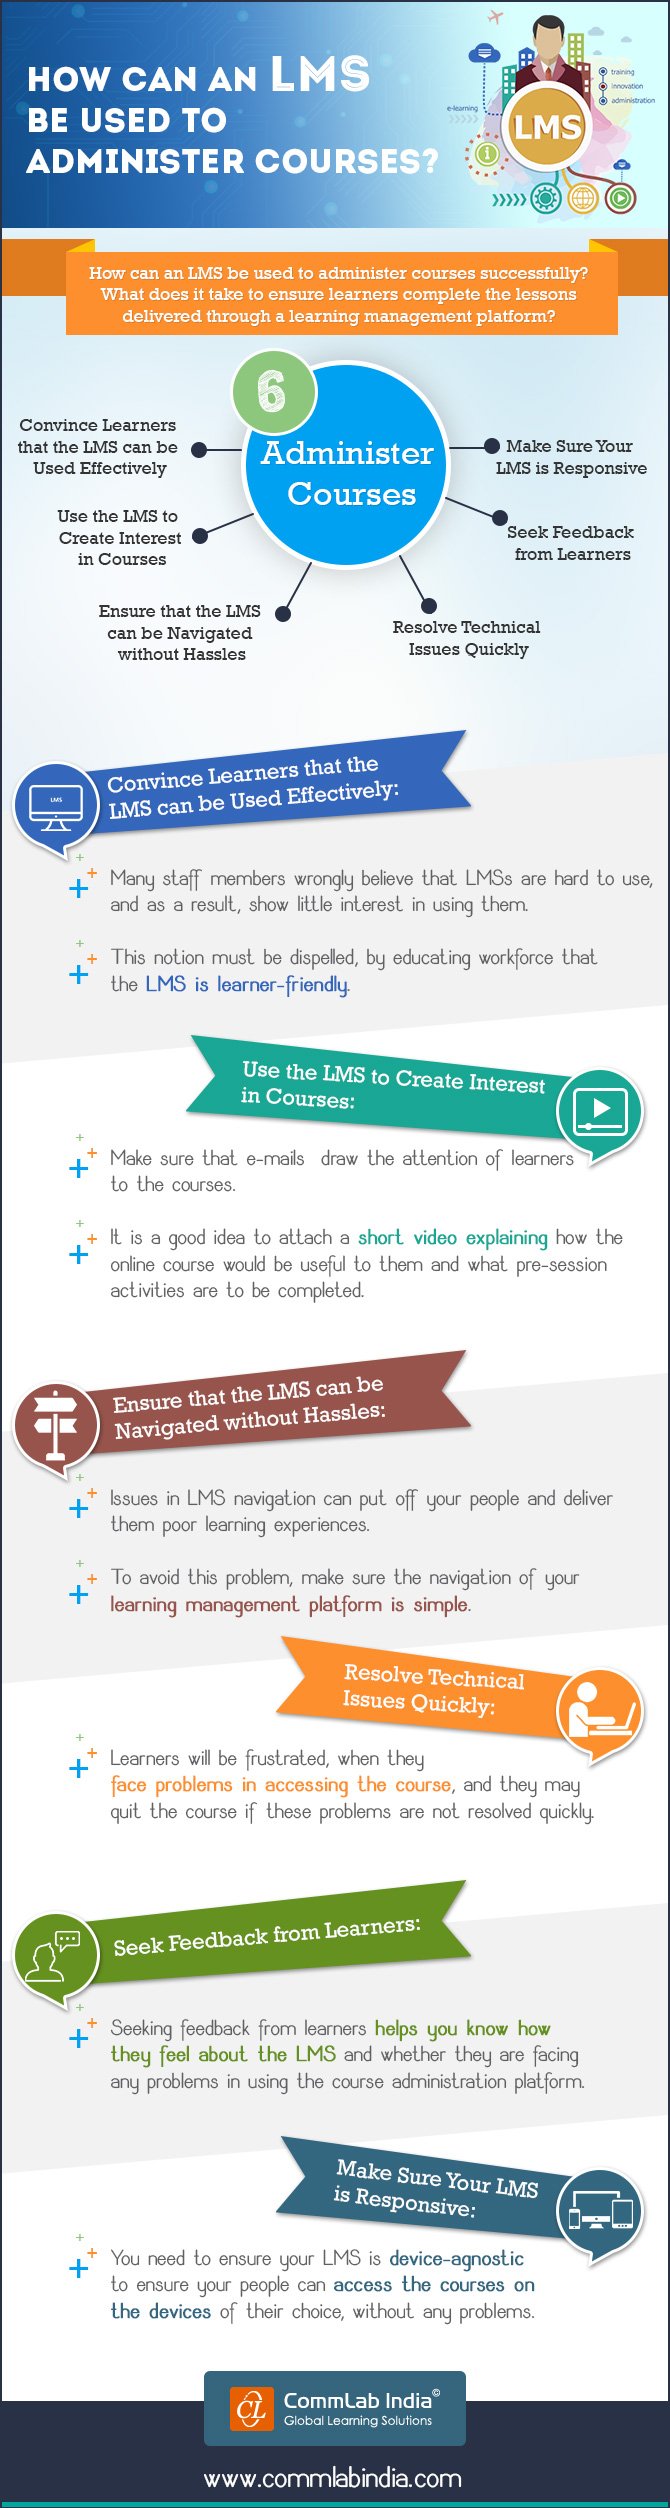 How Can an LMS be Used to Administer Courses? [Infographic]